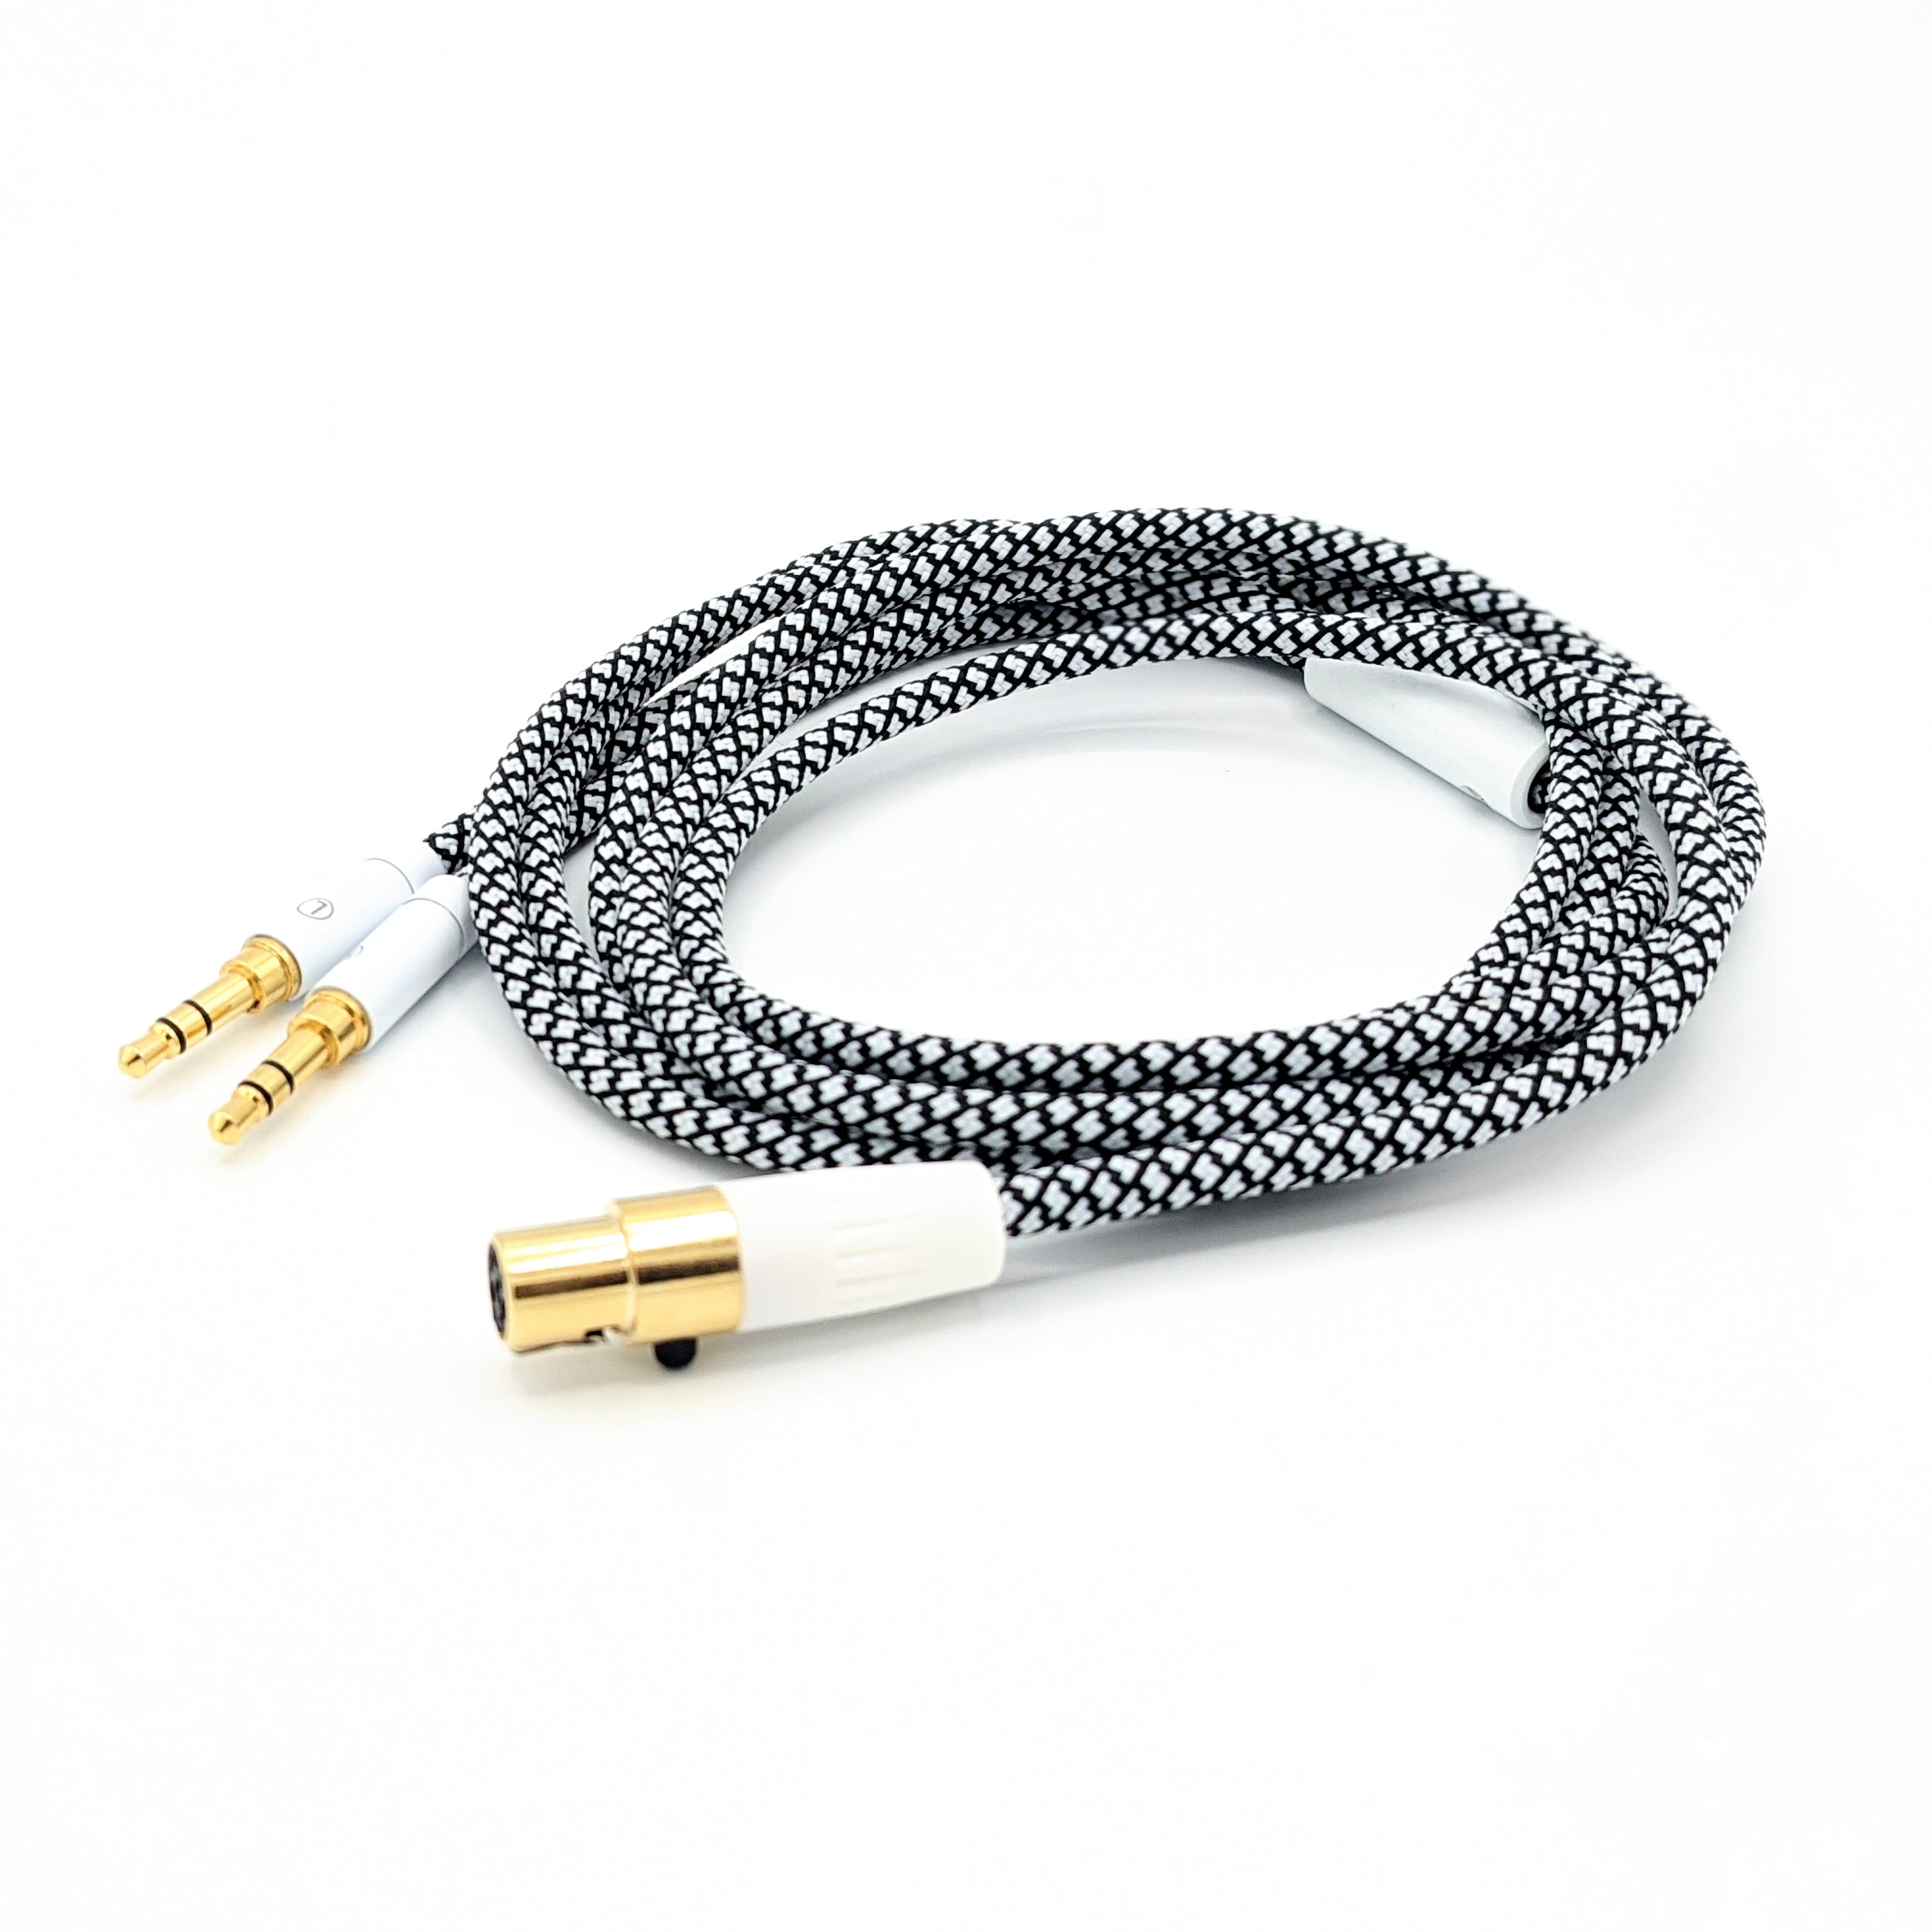 CST-HC-9: Custom Dual 3.5mm TRS Balanced Headphone Cable for Hifiman, Focal, Meze 109 Pro, Meze Liric, and more